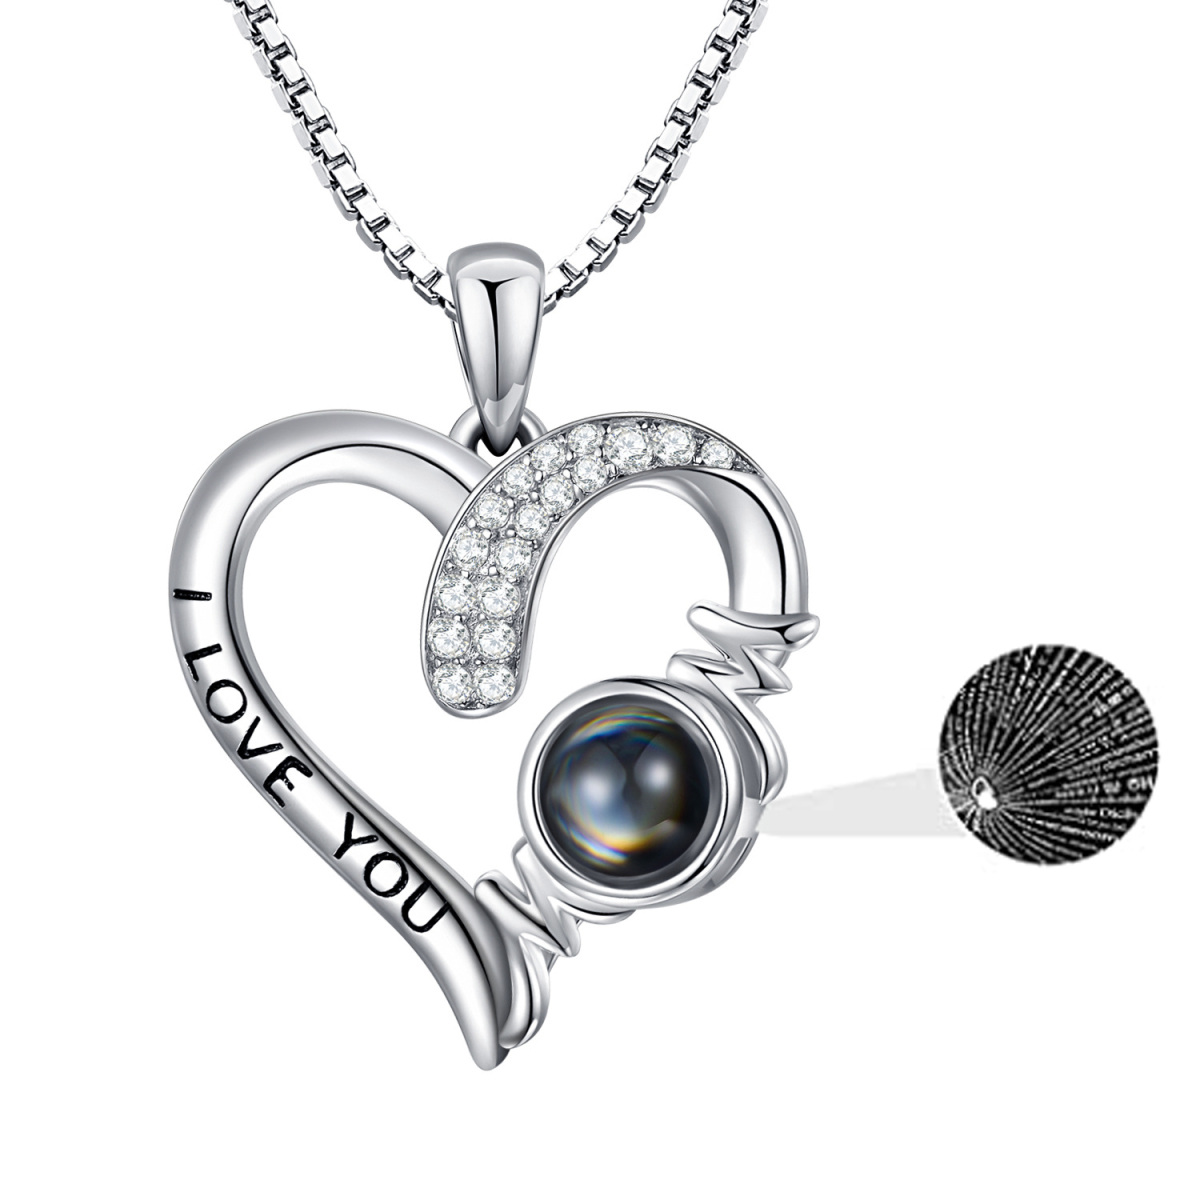 Sterling Silver Circular Shaped Projection Stone Mother & Heart Pendant Necklace with Engraved Word-1